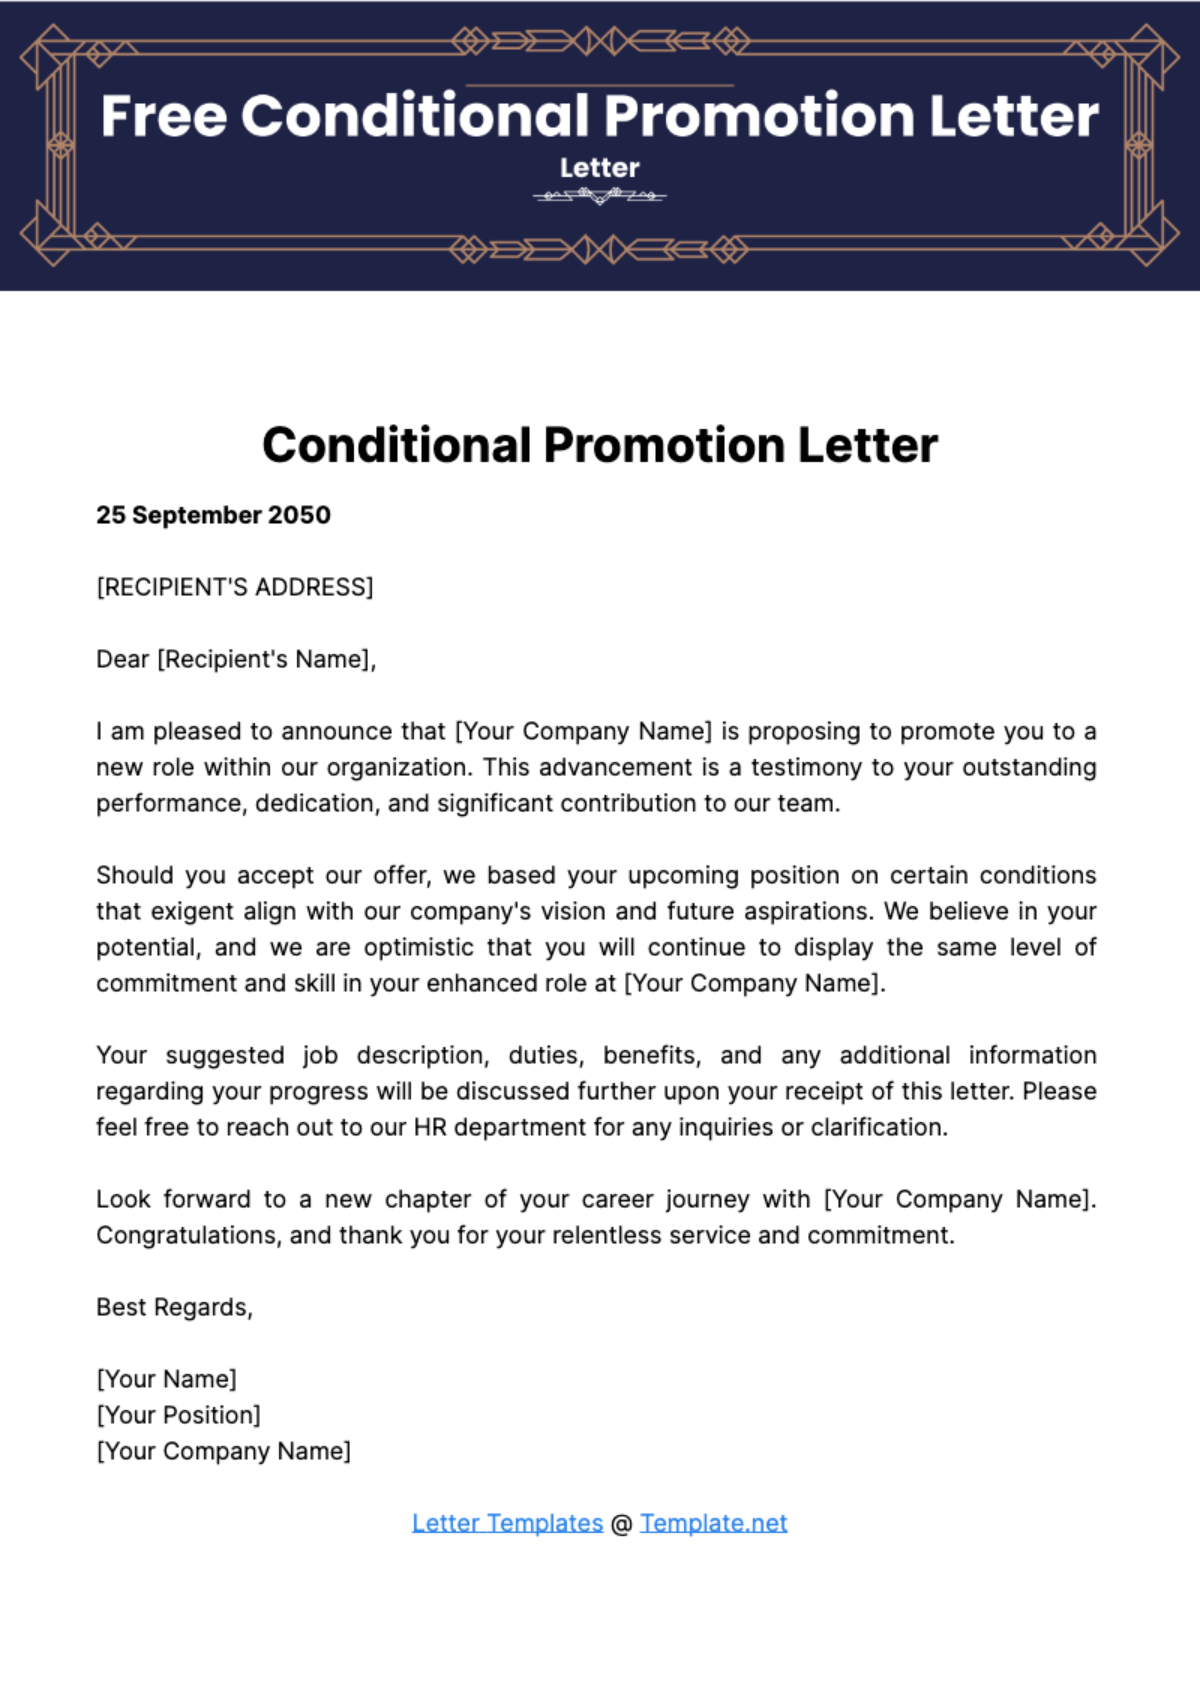 Free Conditional Promotion Letter Template